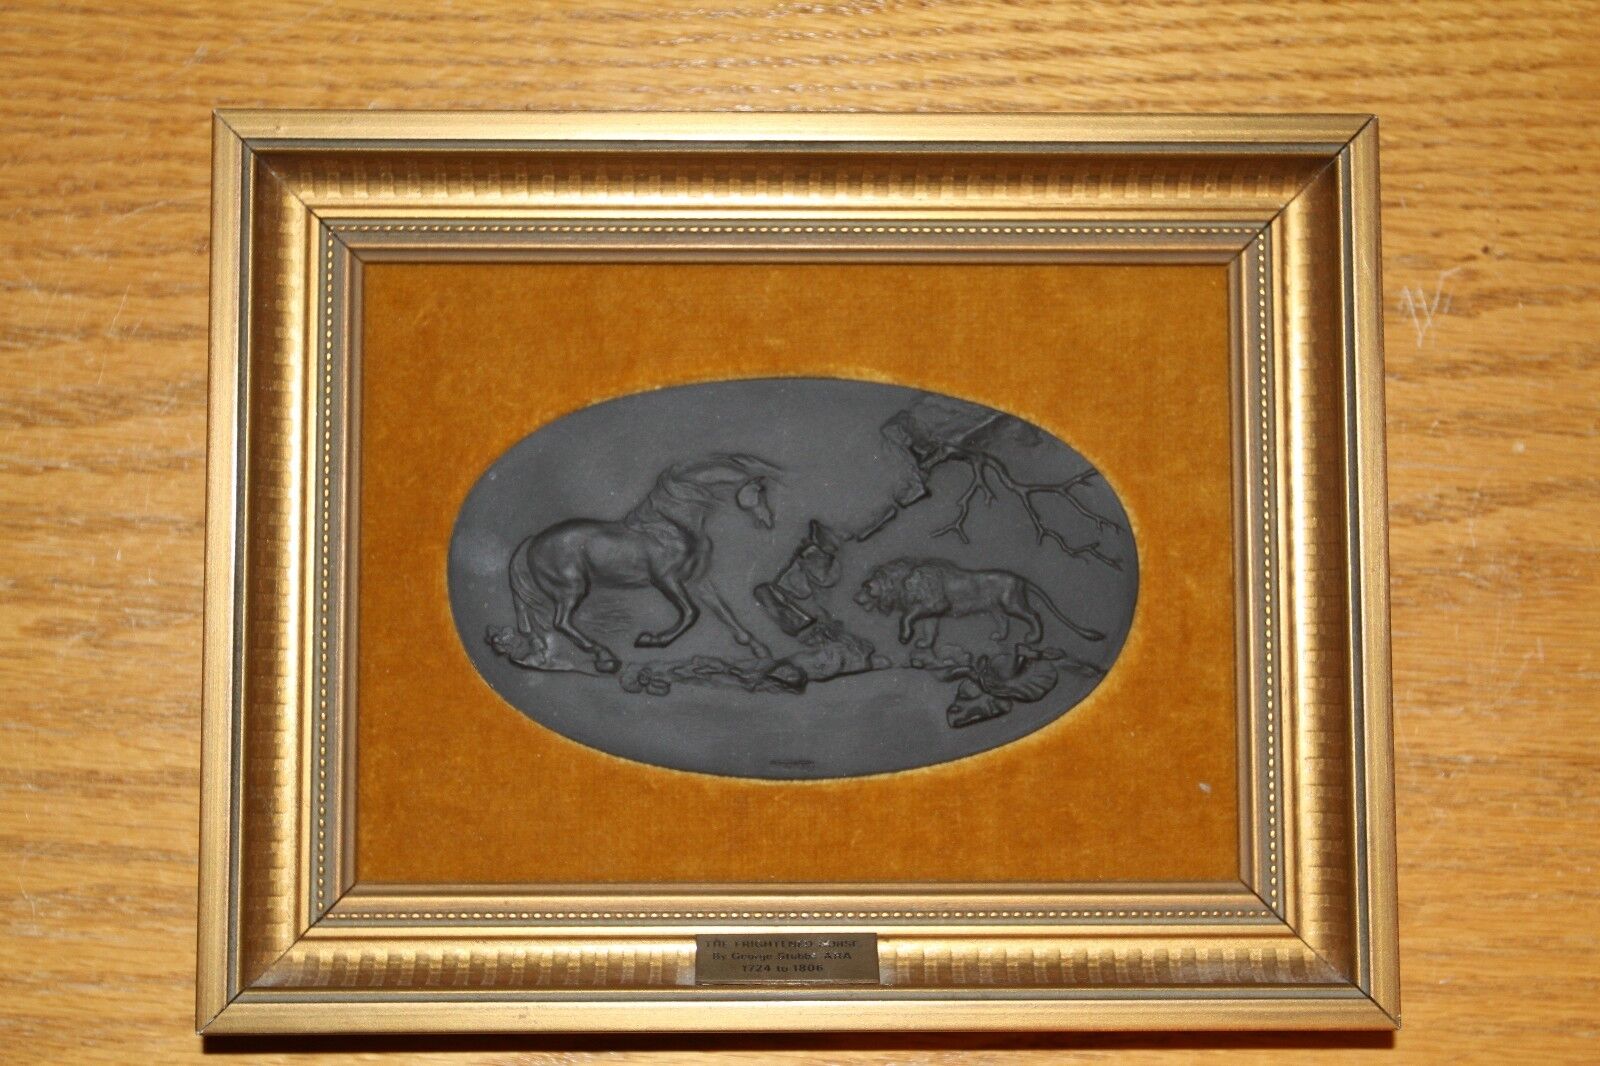 Wedgwood Basalt Limited Edition The Frightened Horse Framed Plaque